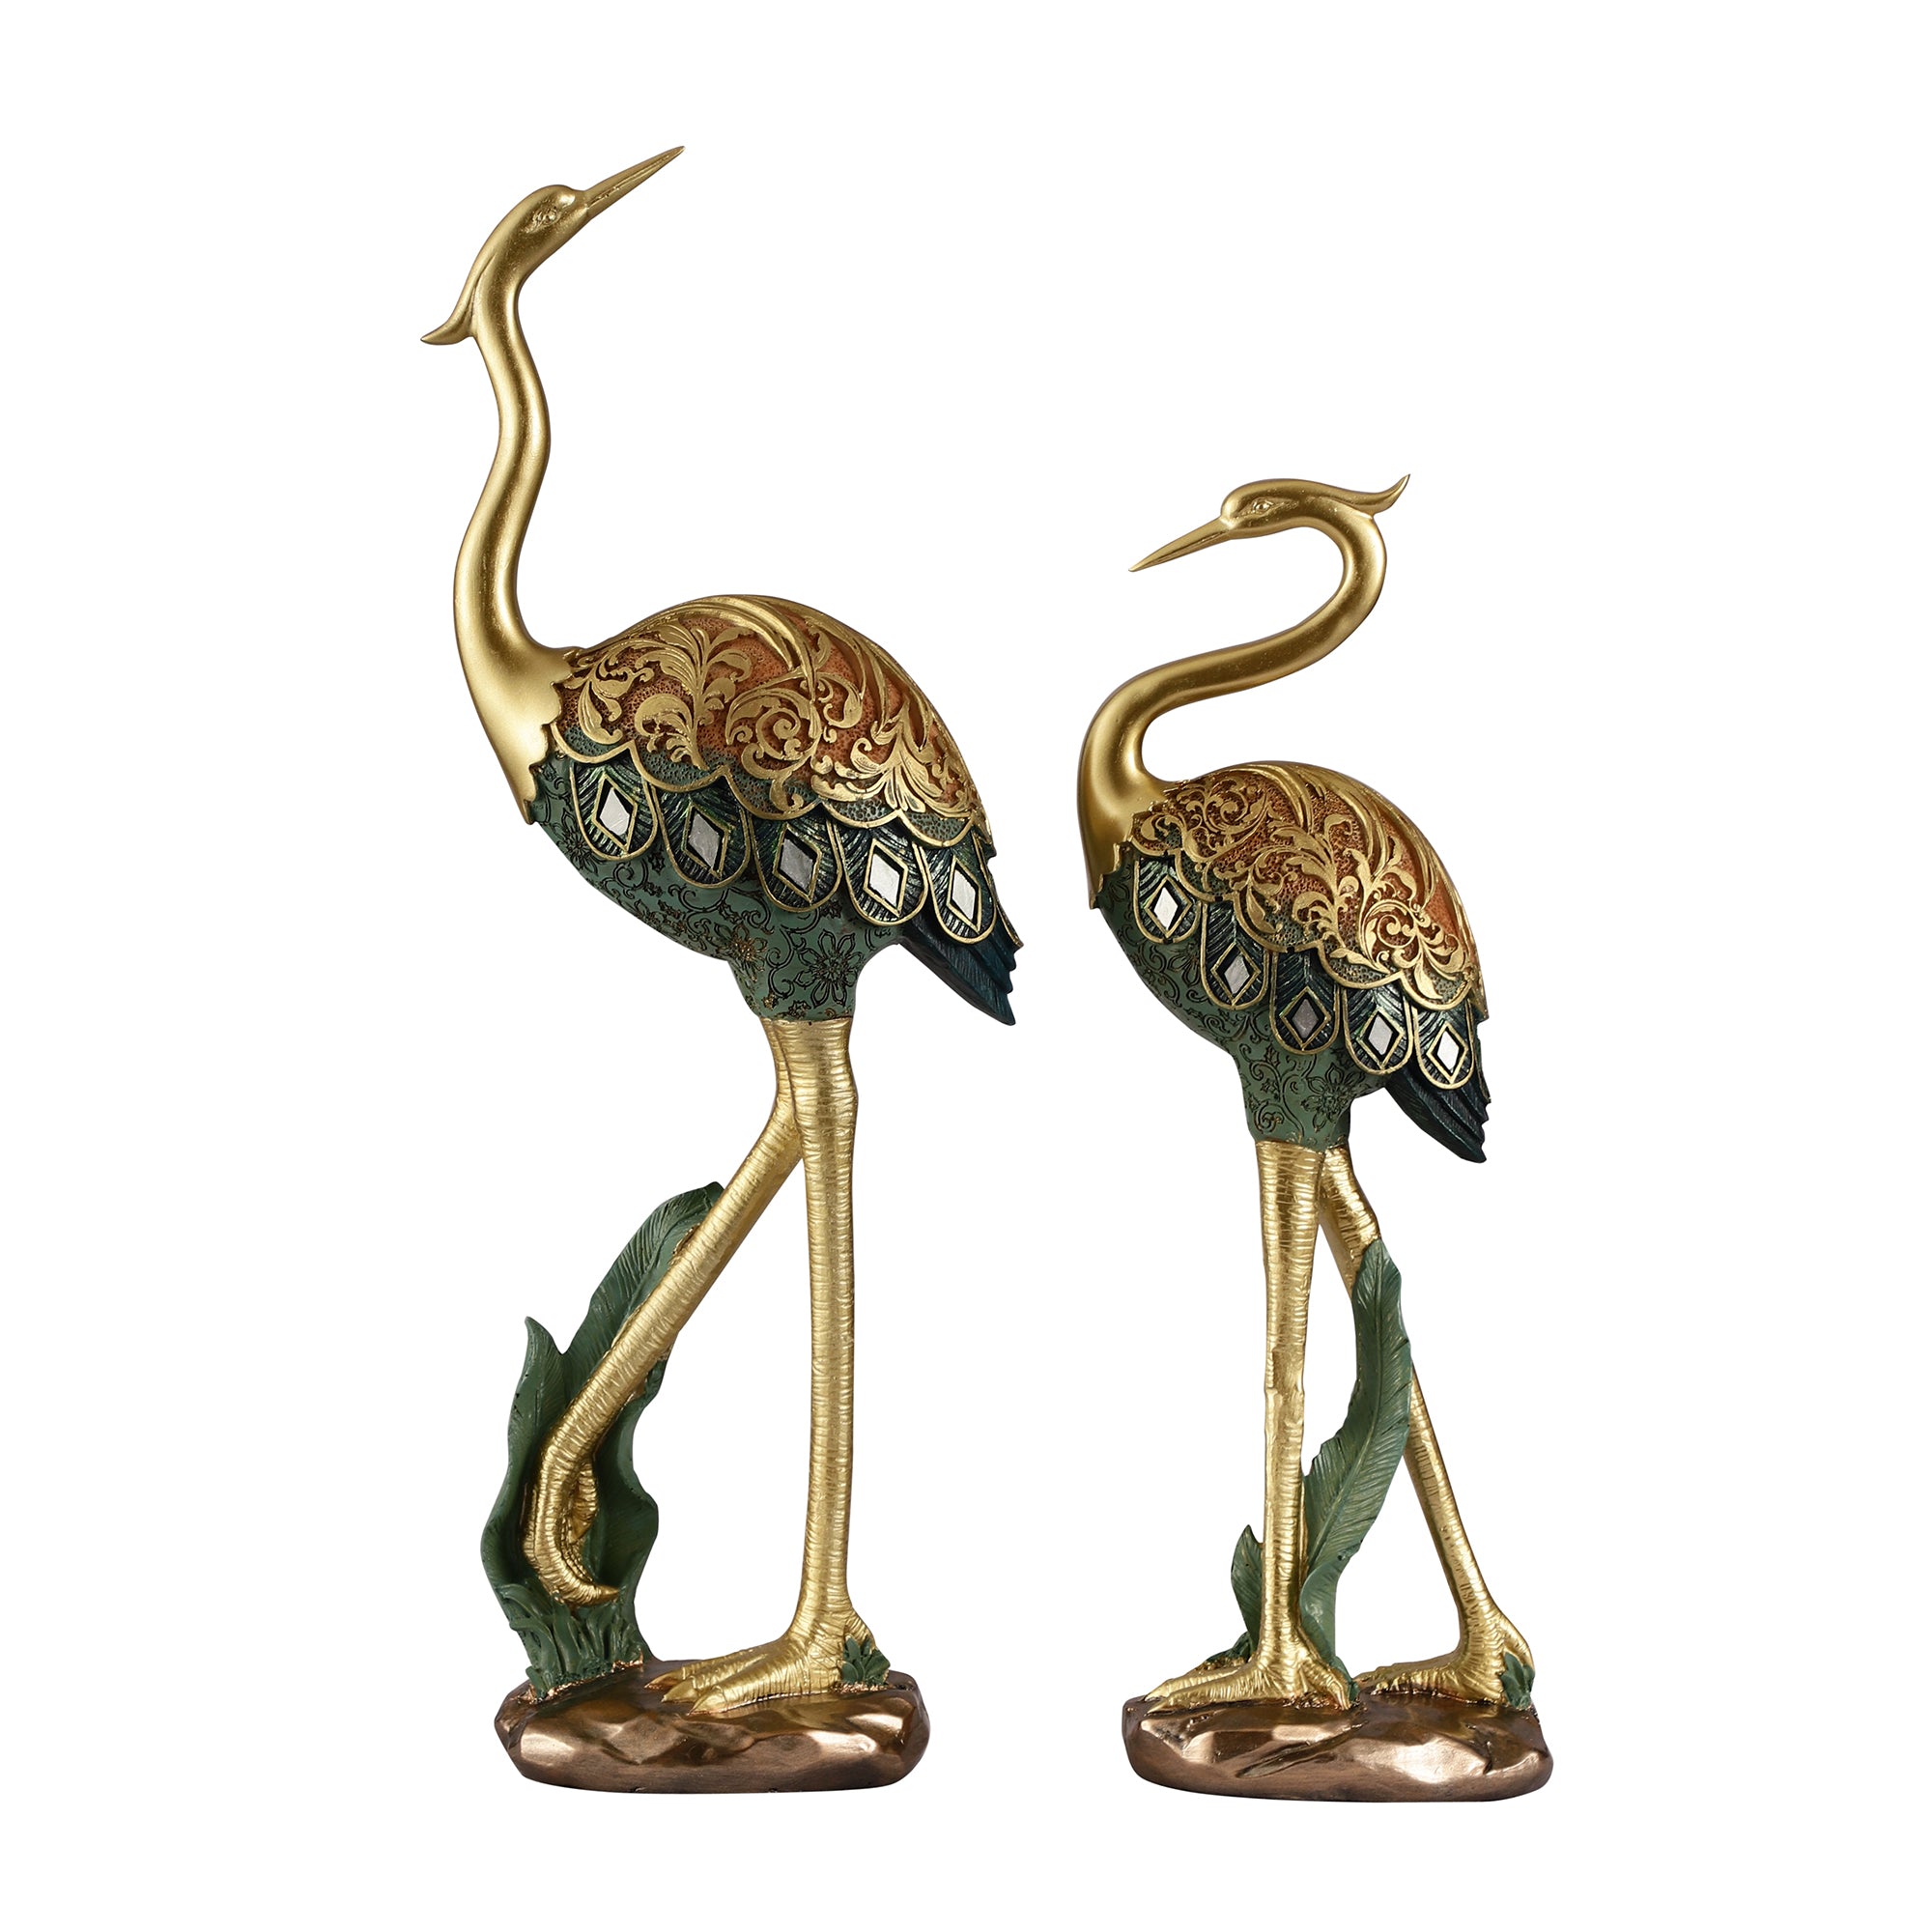 Lucky Charm Cranes (Set of 2)